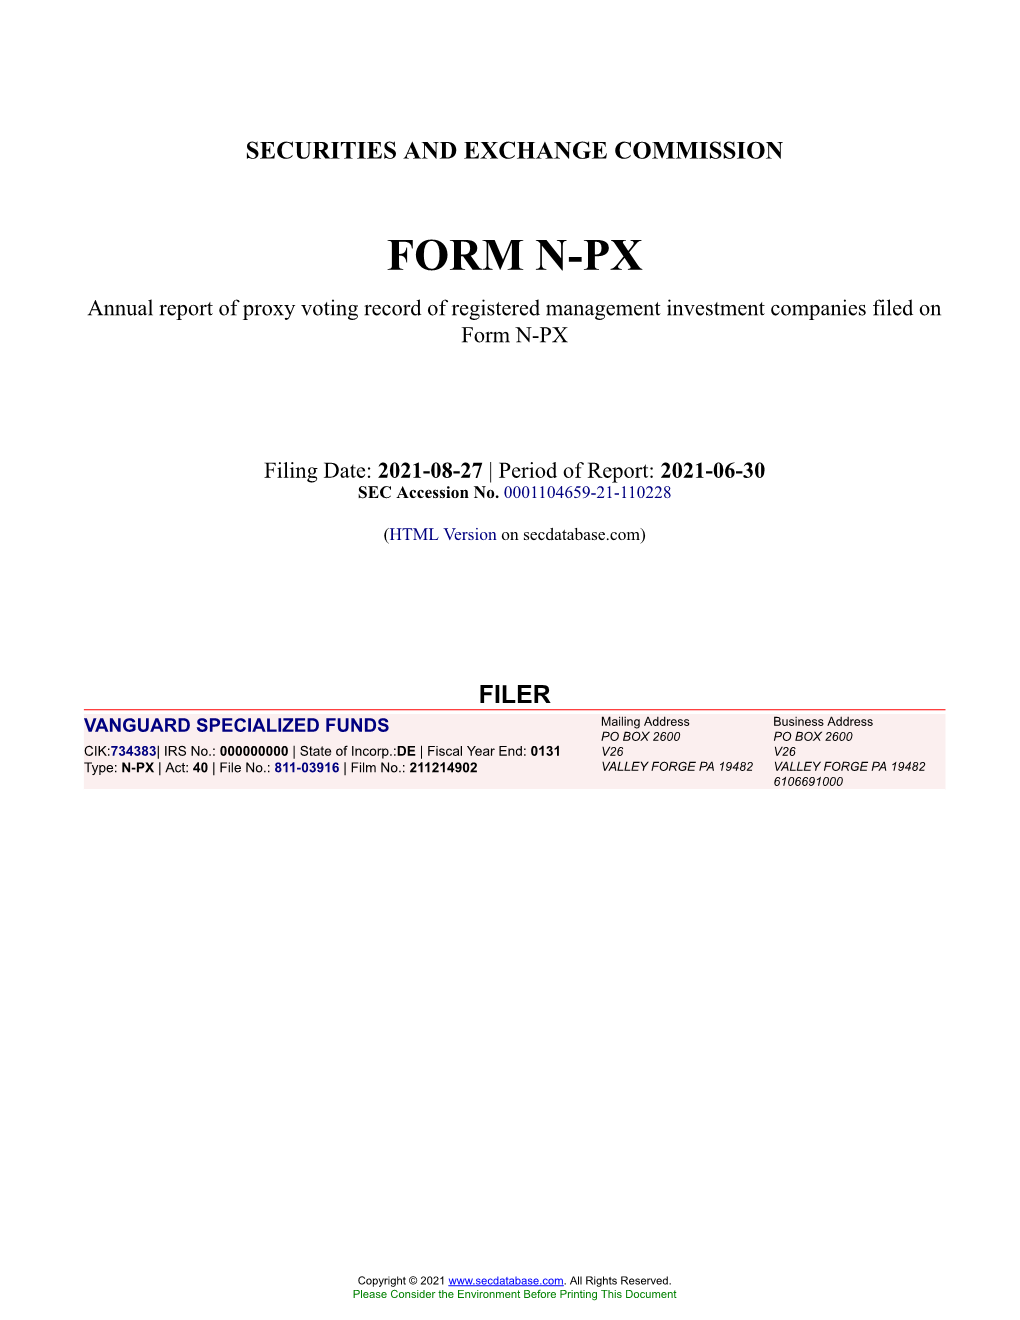 VANGUARD SPECIALIZED FUNDS Form N-PX Filed 2021-08-27